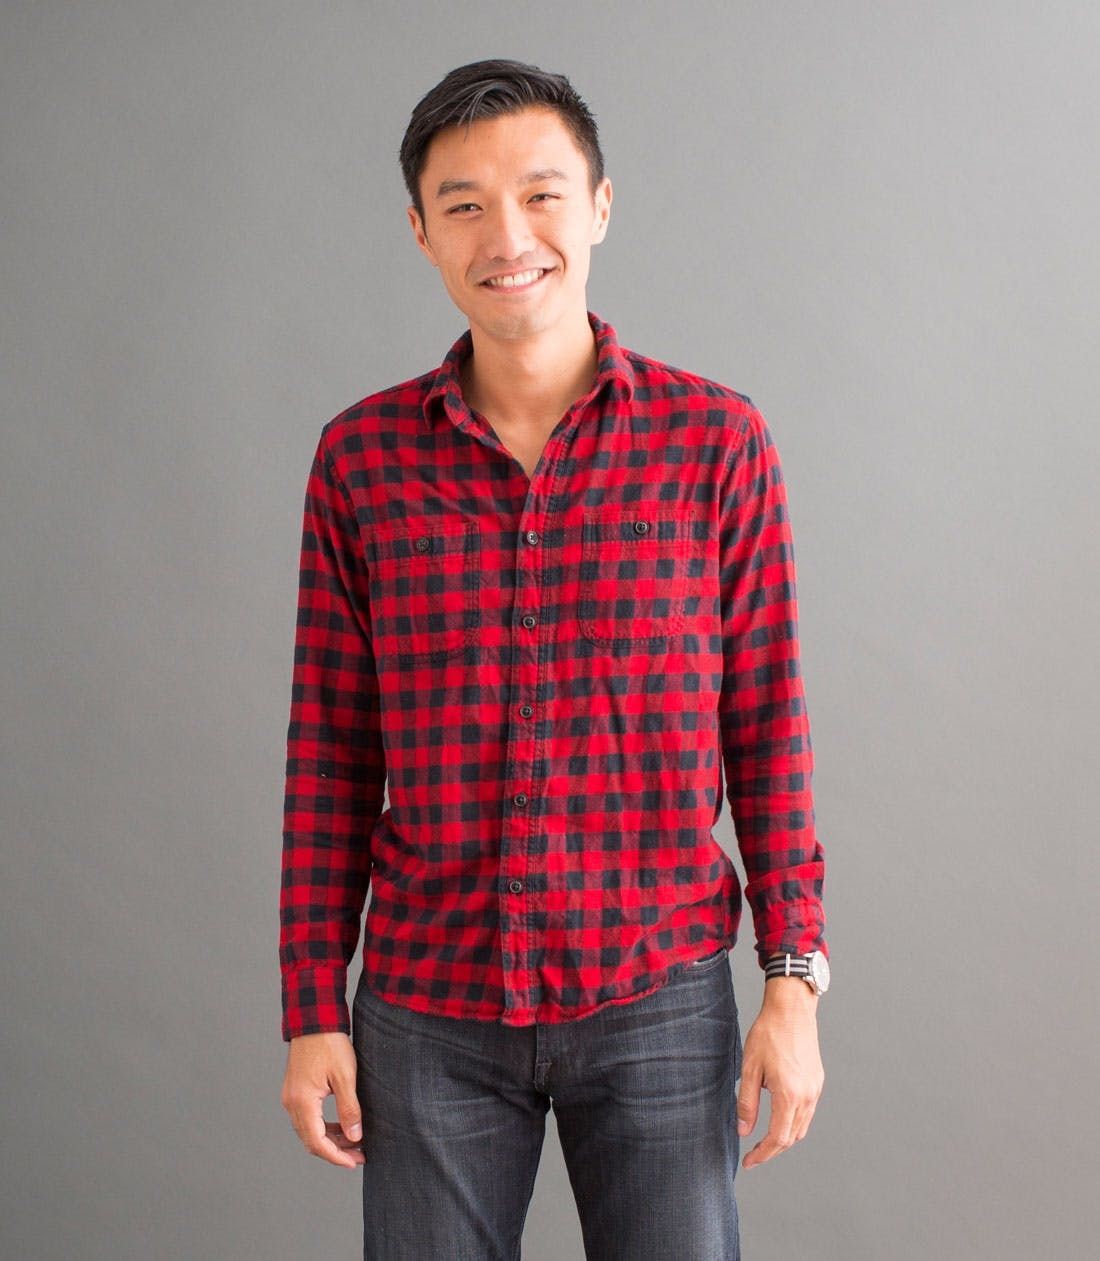 15 Ways to Style a Flannel Shirt When You're Not Paul Bunyan